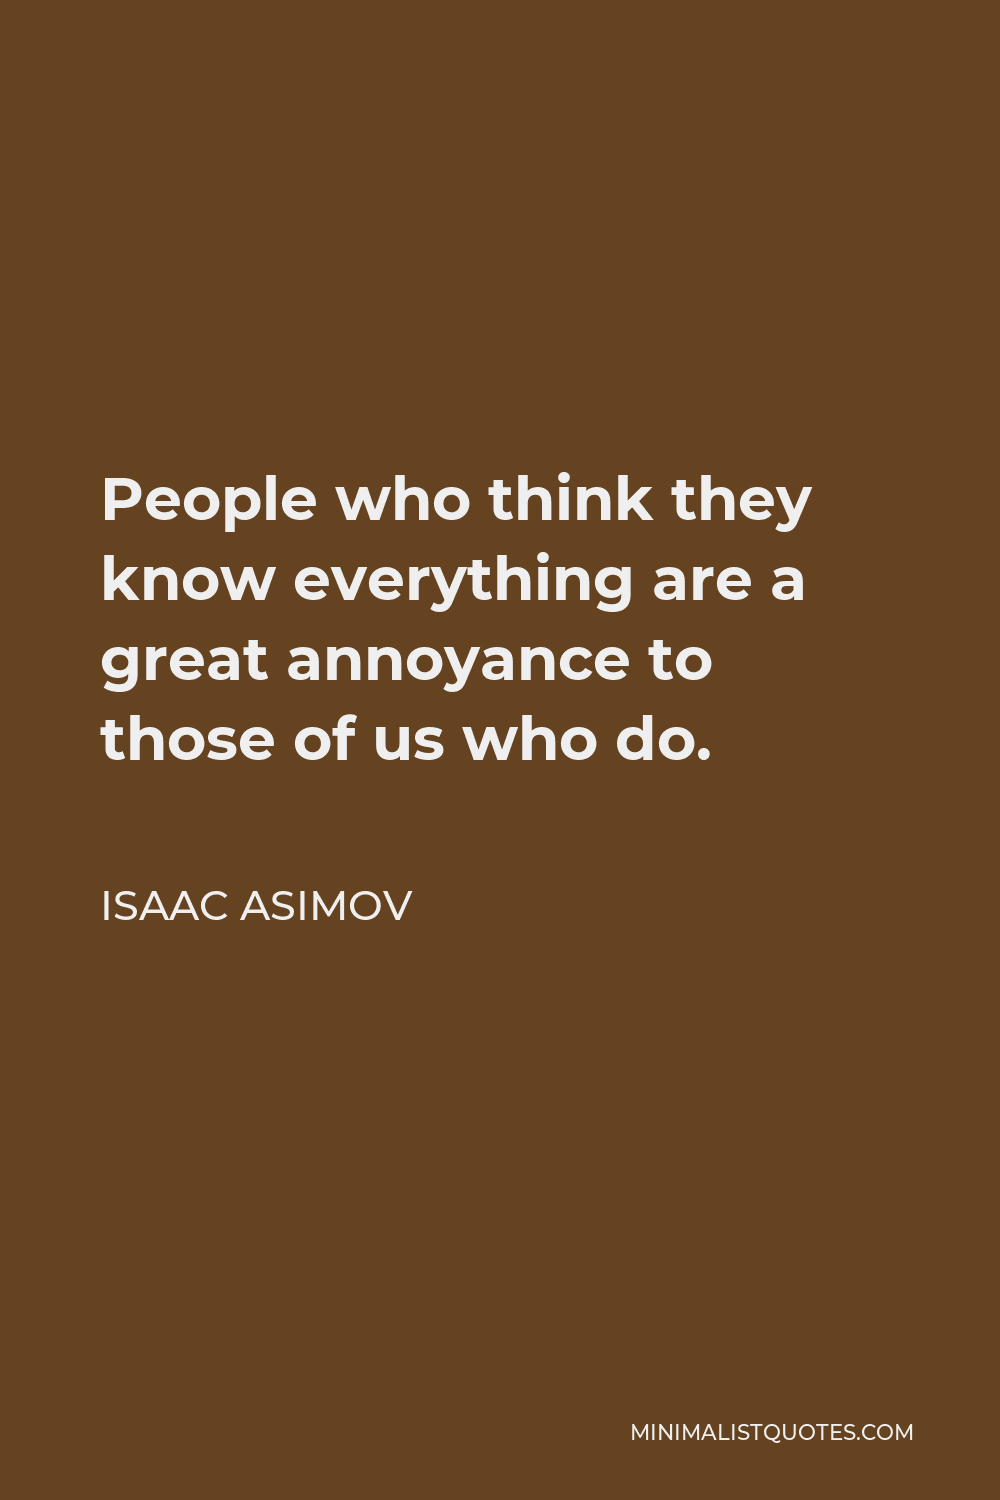 Isaac Asimov quote: People who think they know everything are a great  annoyance